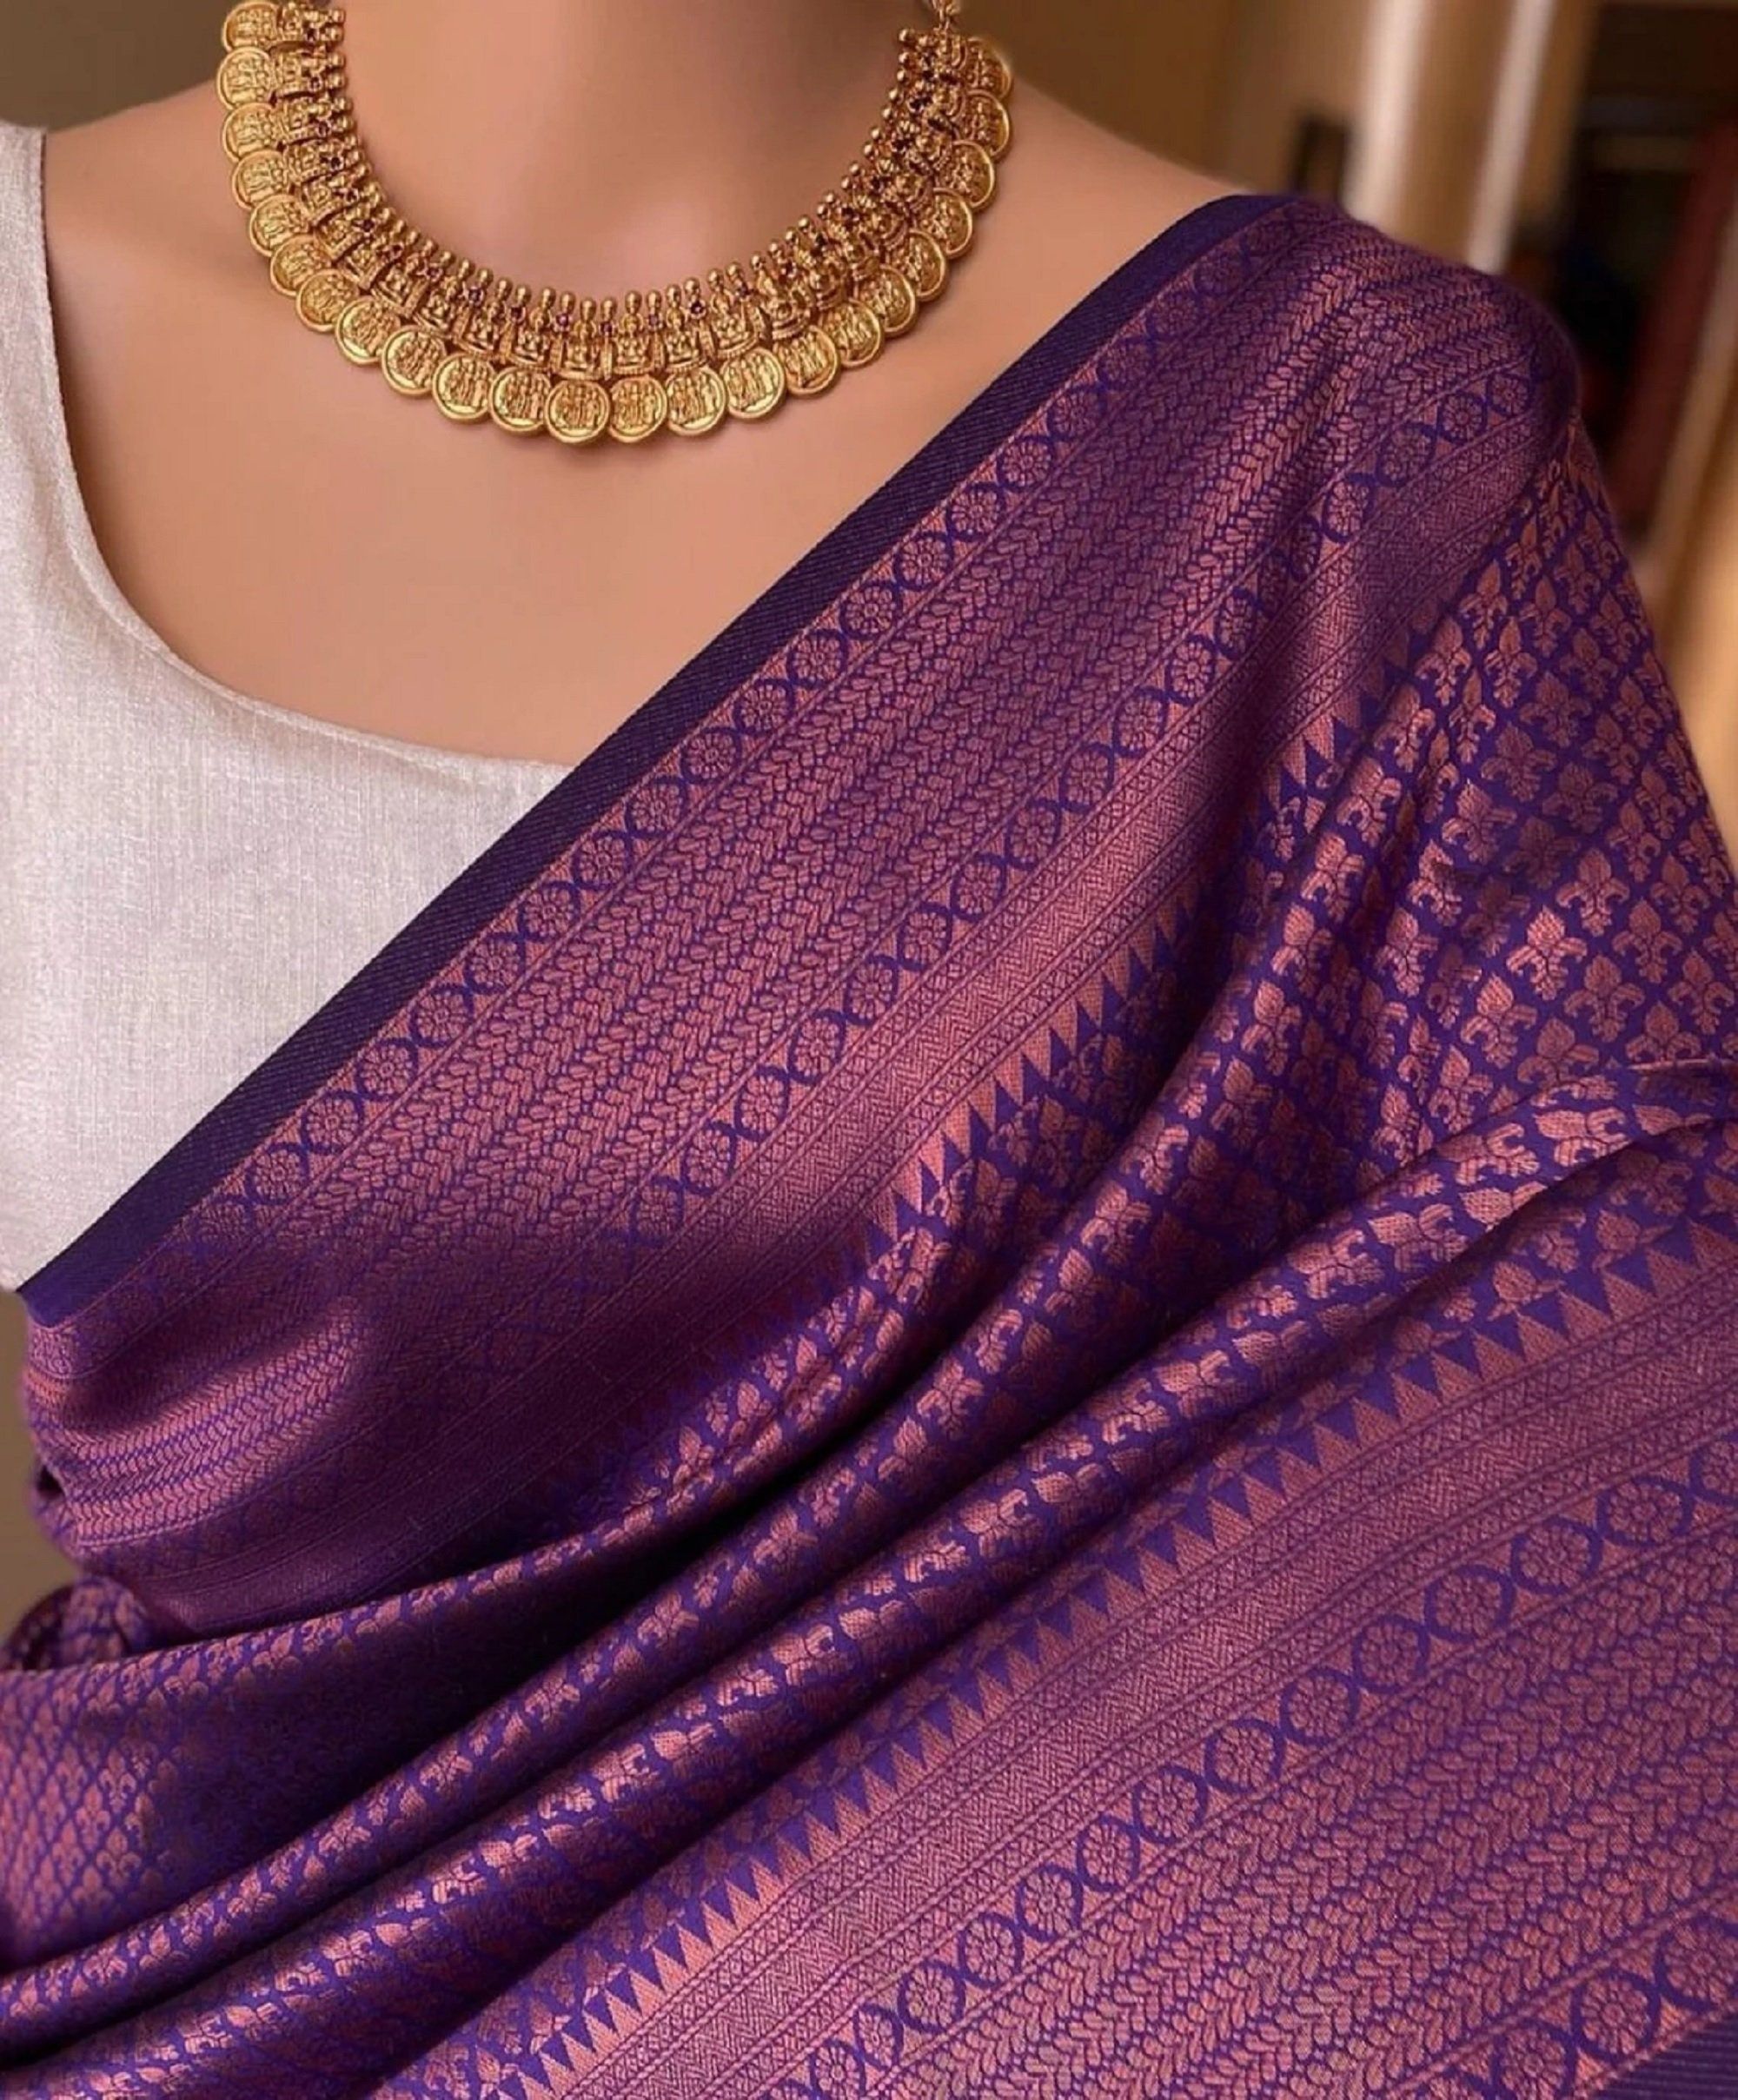 Sarees Blouse Designs: Complete Your Saree Look with Stylish and Elegant Blouse Designs